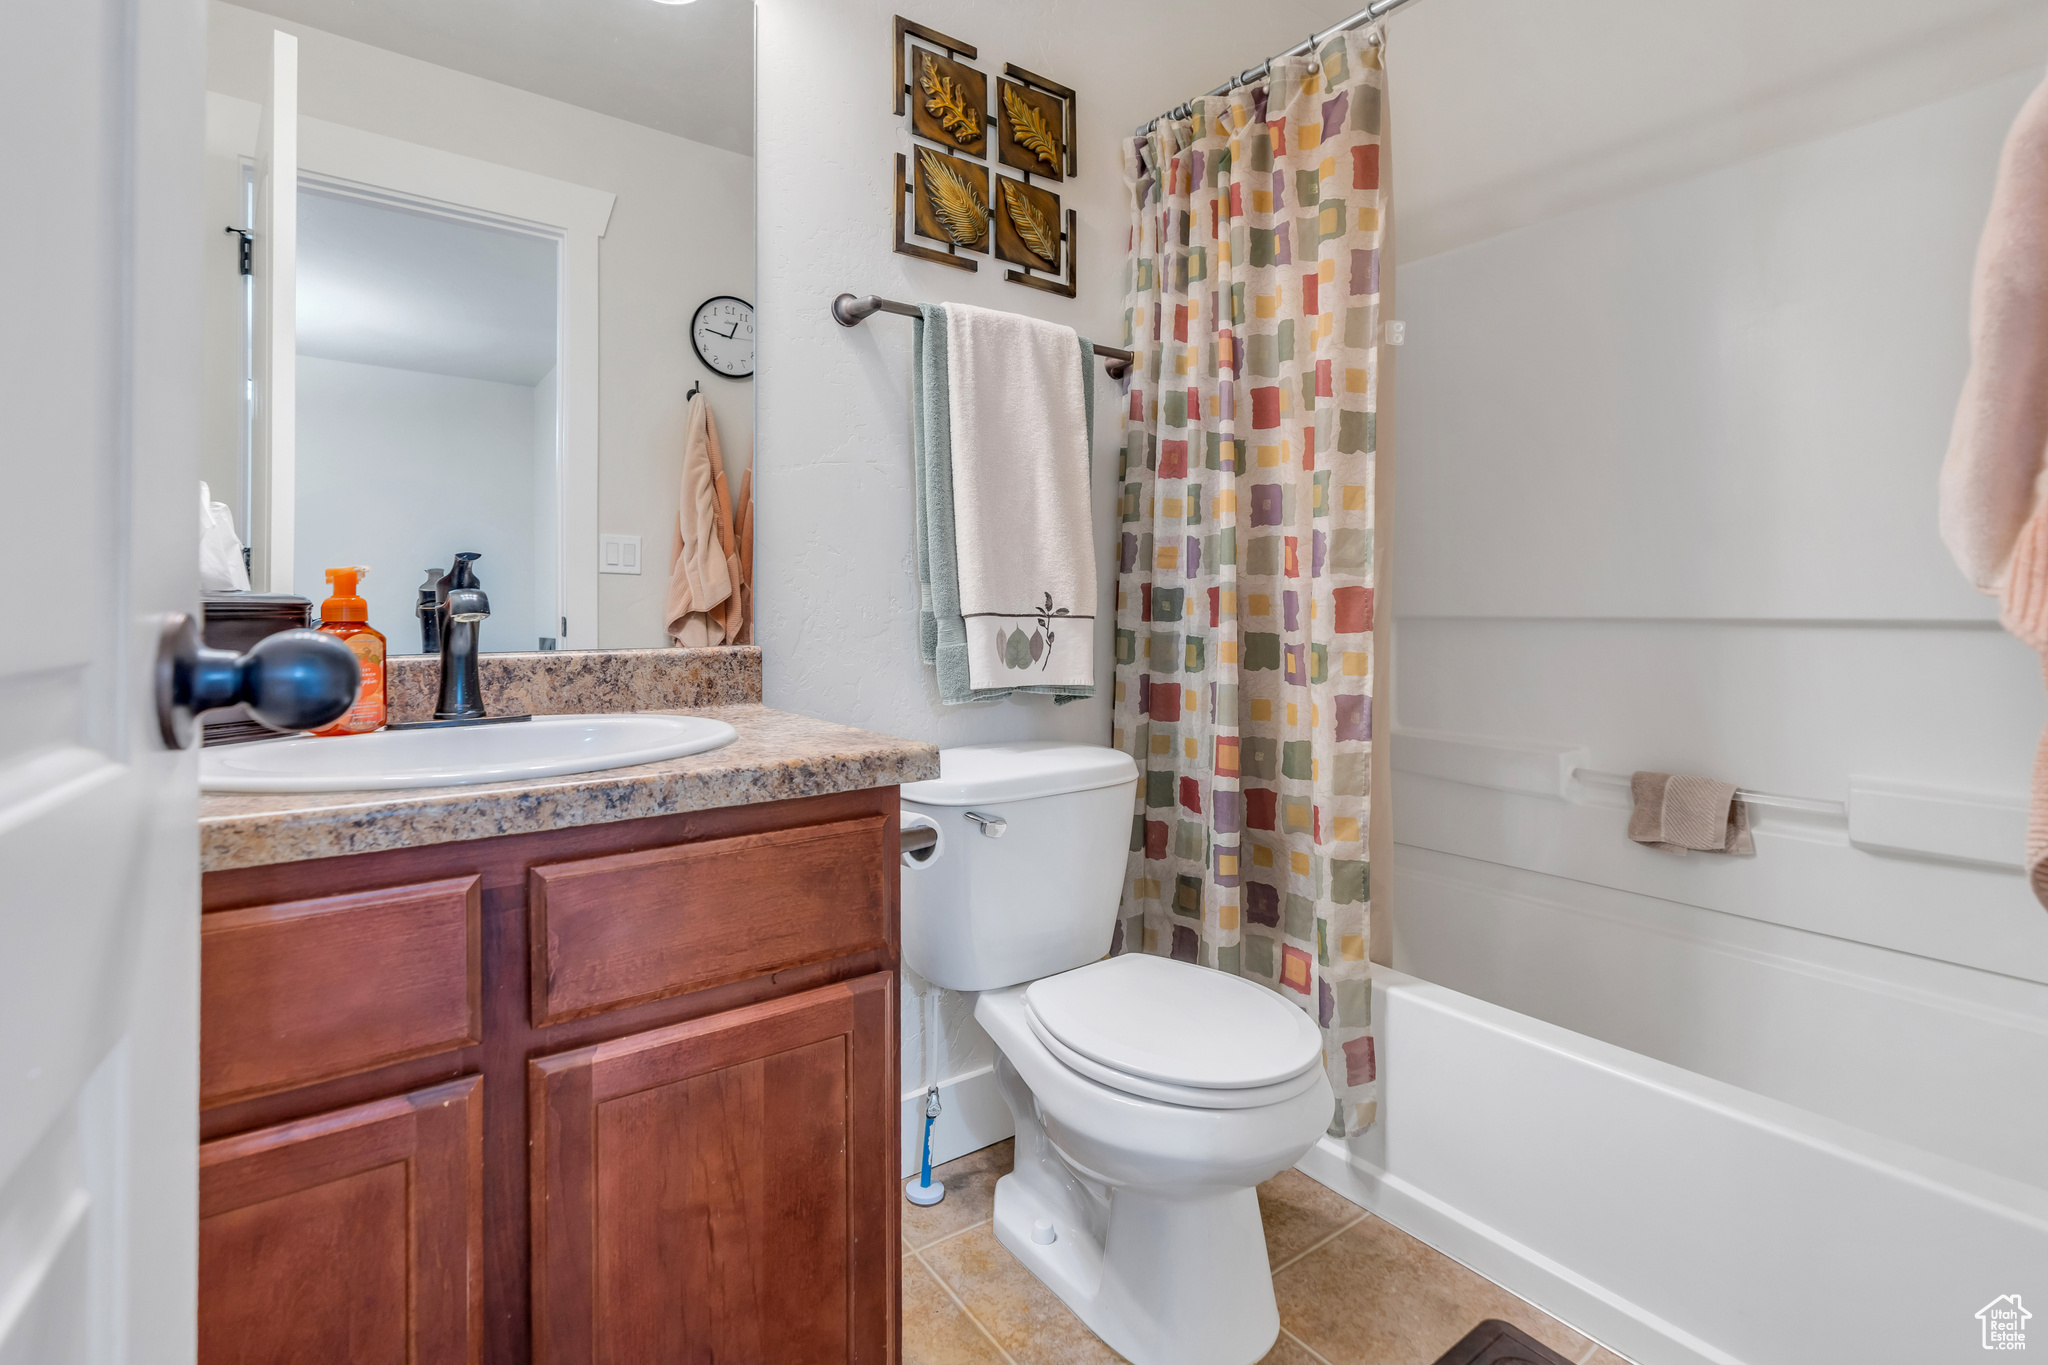 Full bathroom with shower / bath combo with shower curtain, tile flooring, vanity, and toilet